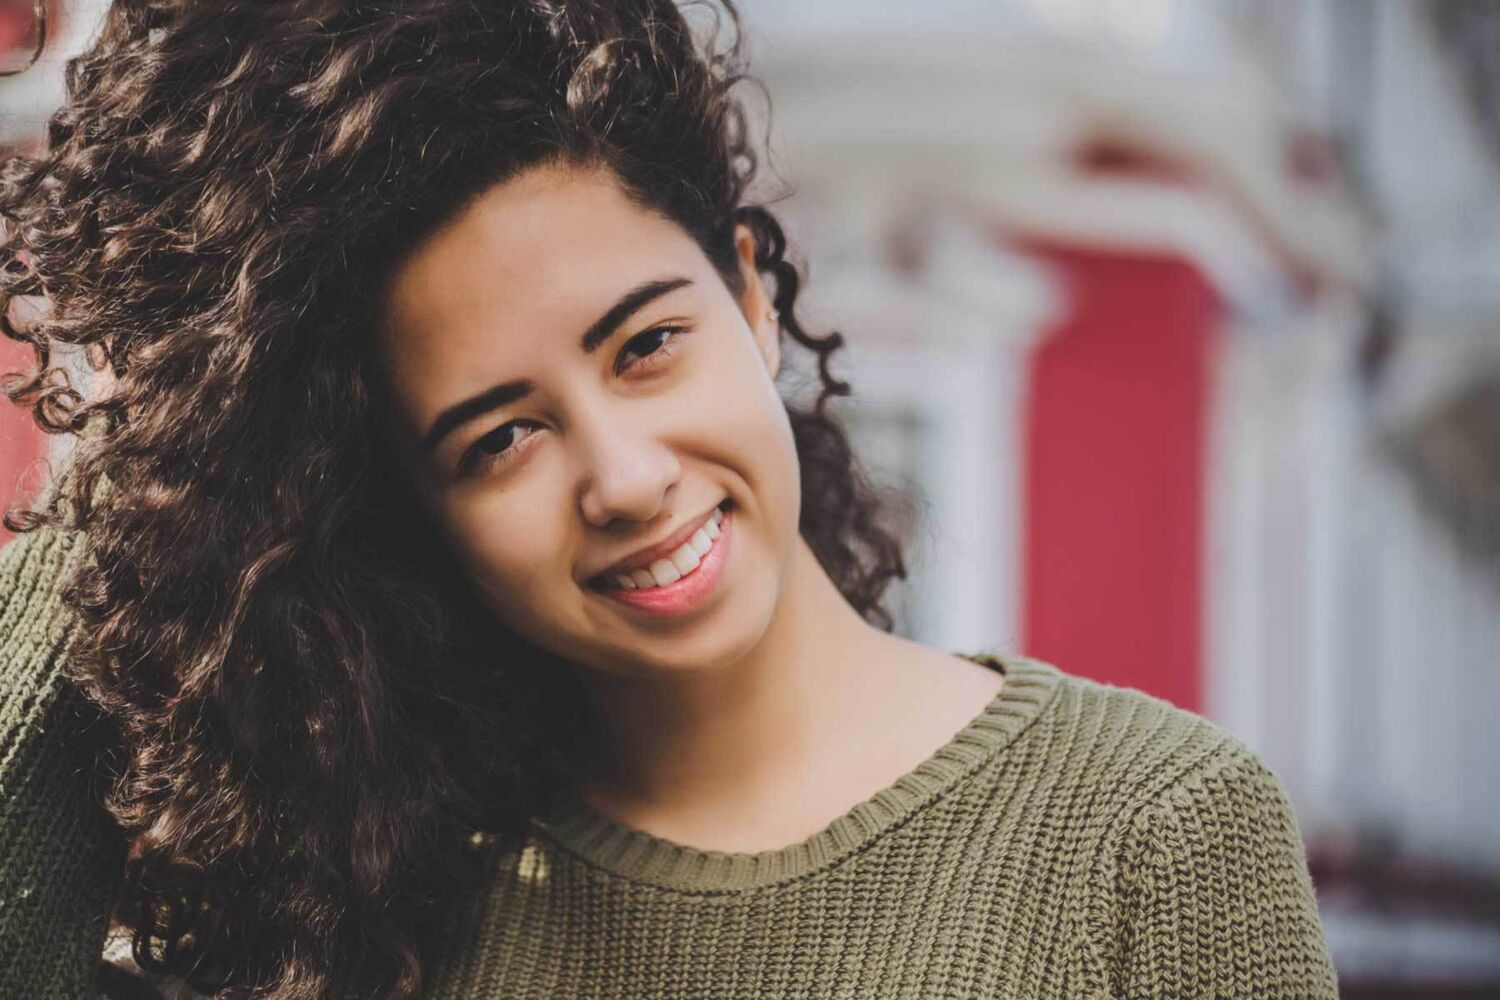 Young Girl With Curly Hair And Green Top Smiling